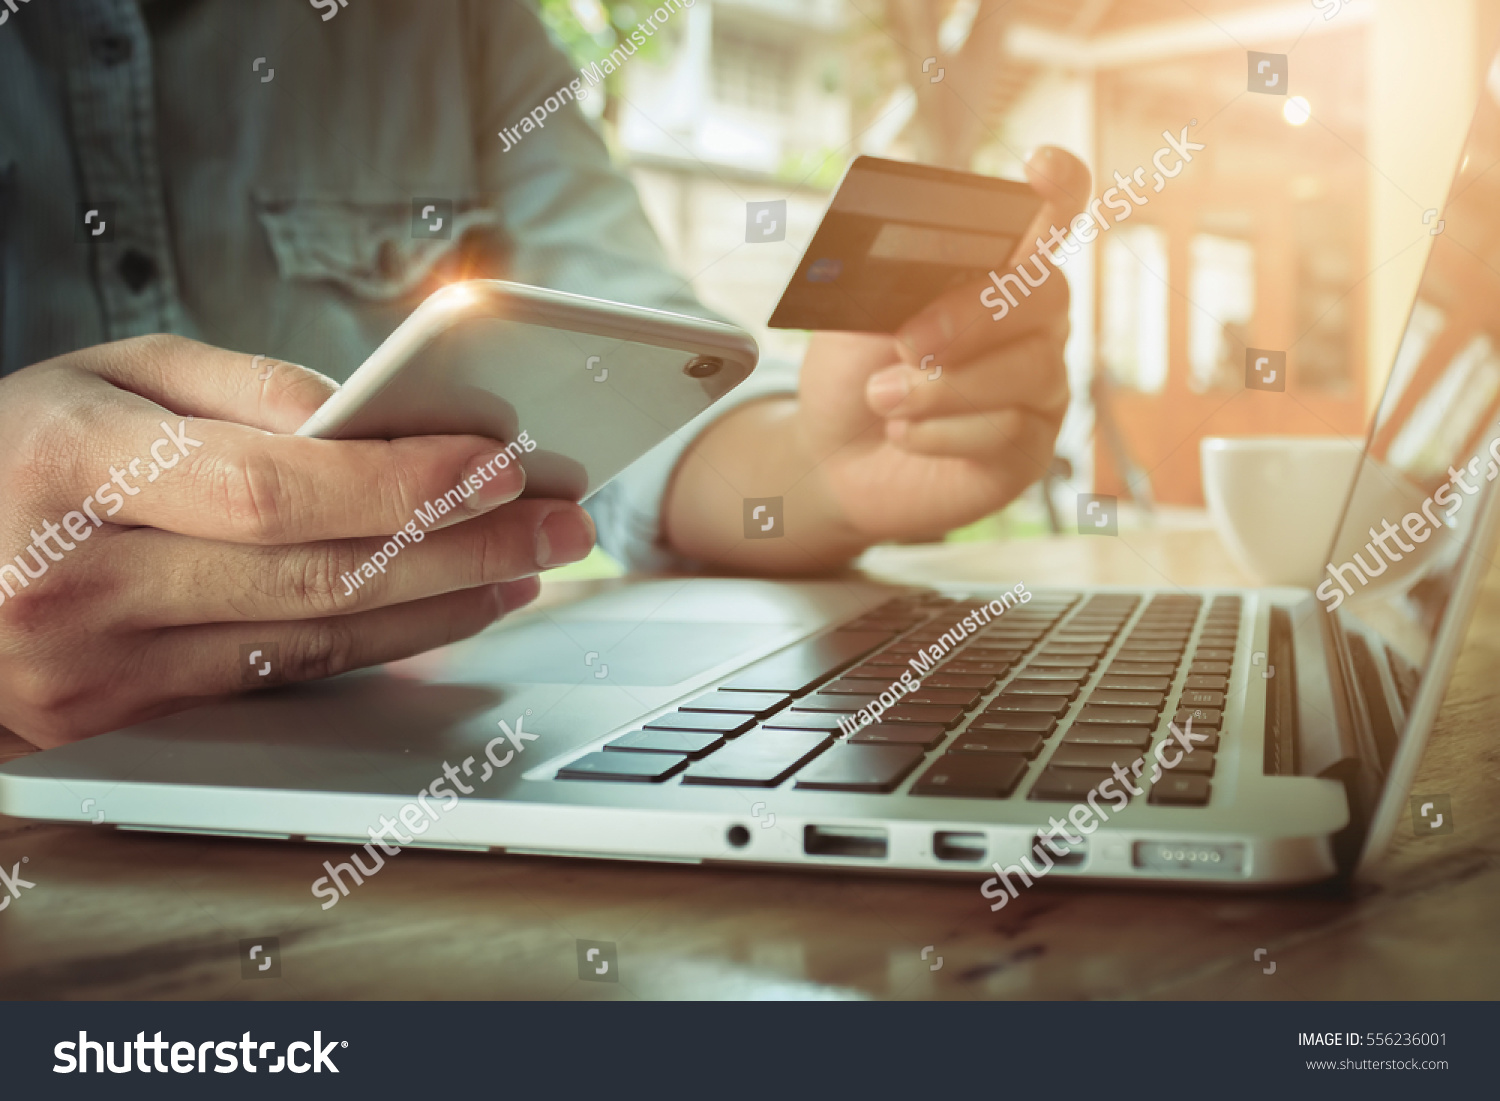 Online payment,Man's hands holding smartphone  and using credit card for online shopping. #556236001